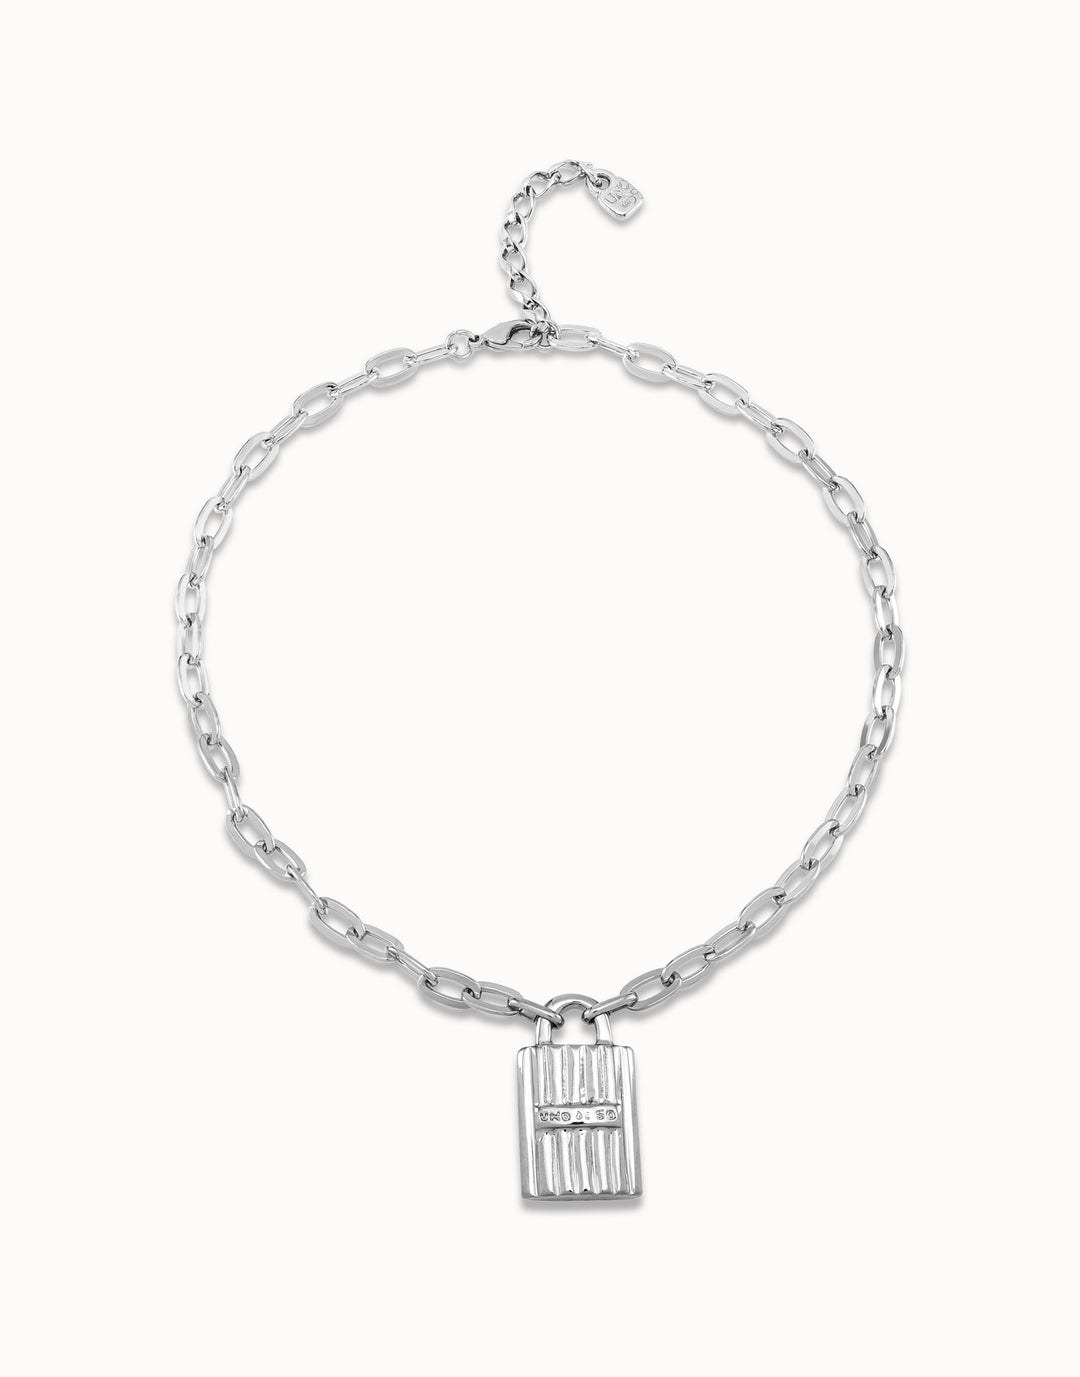 MAGIC KEY NECKLACE SILVER - Kingfisher Road - Online Boutique